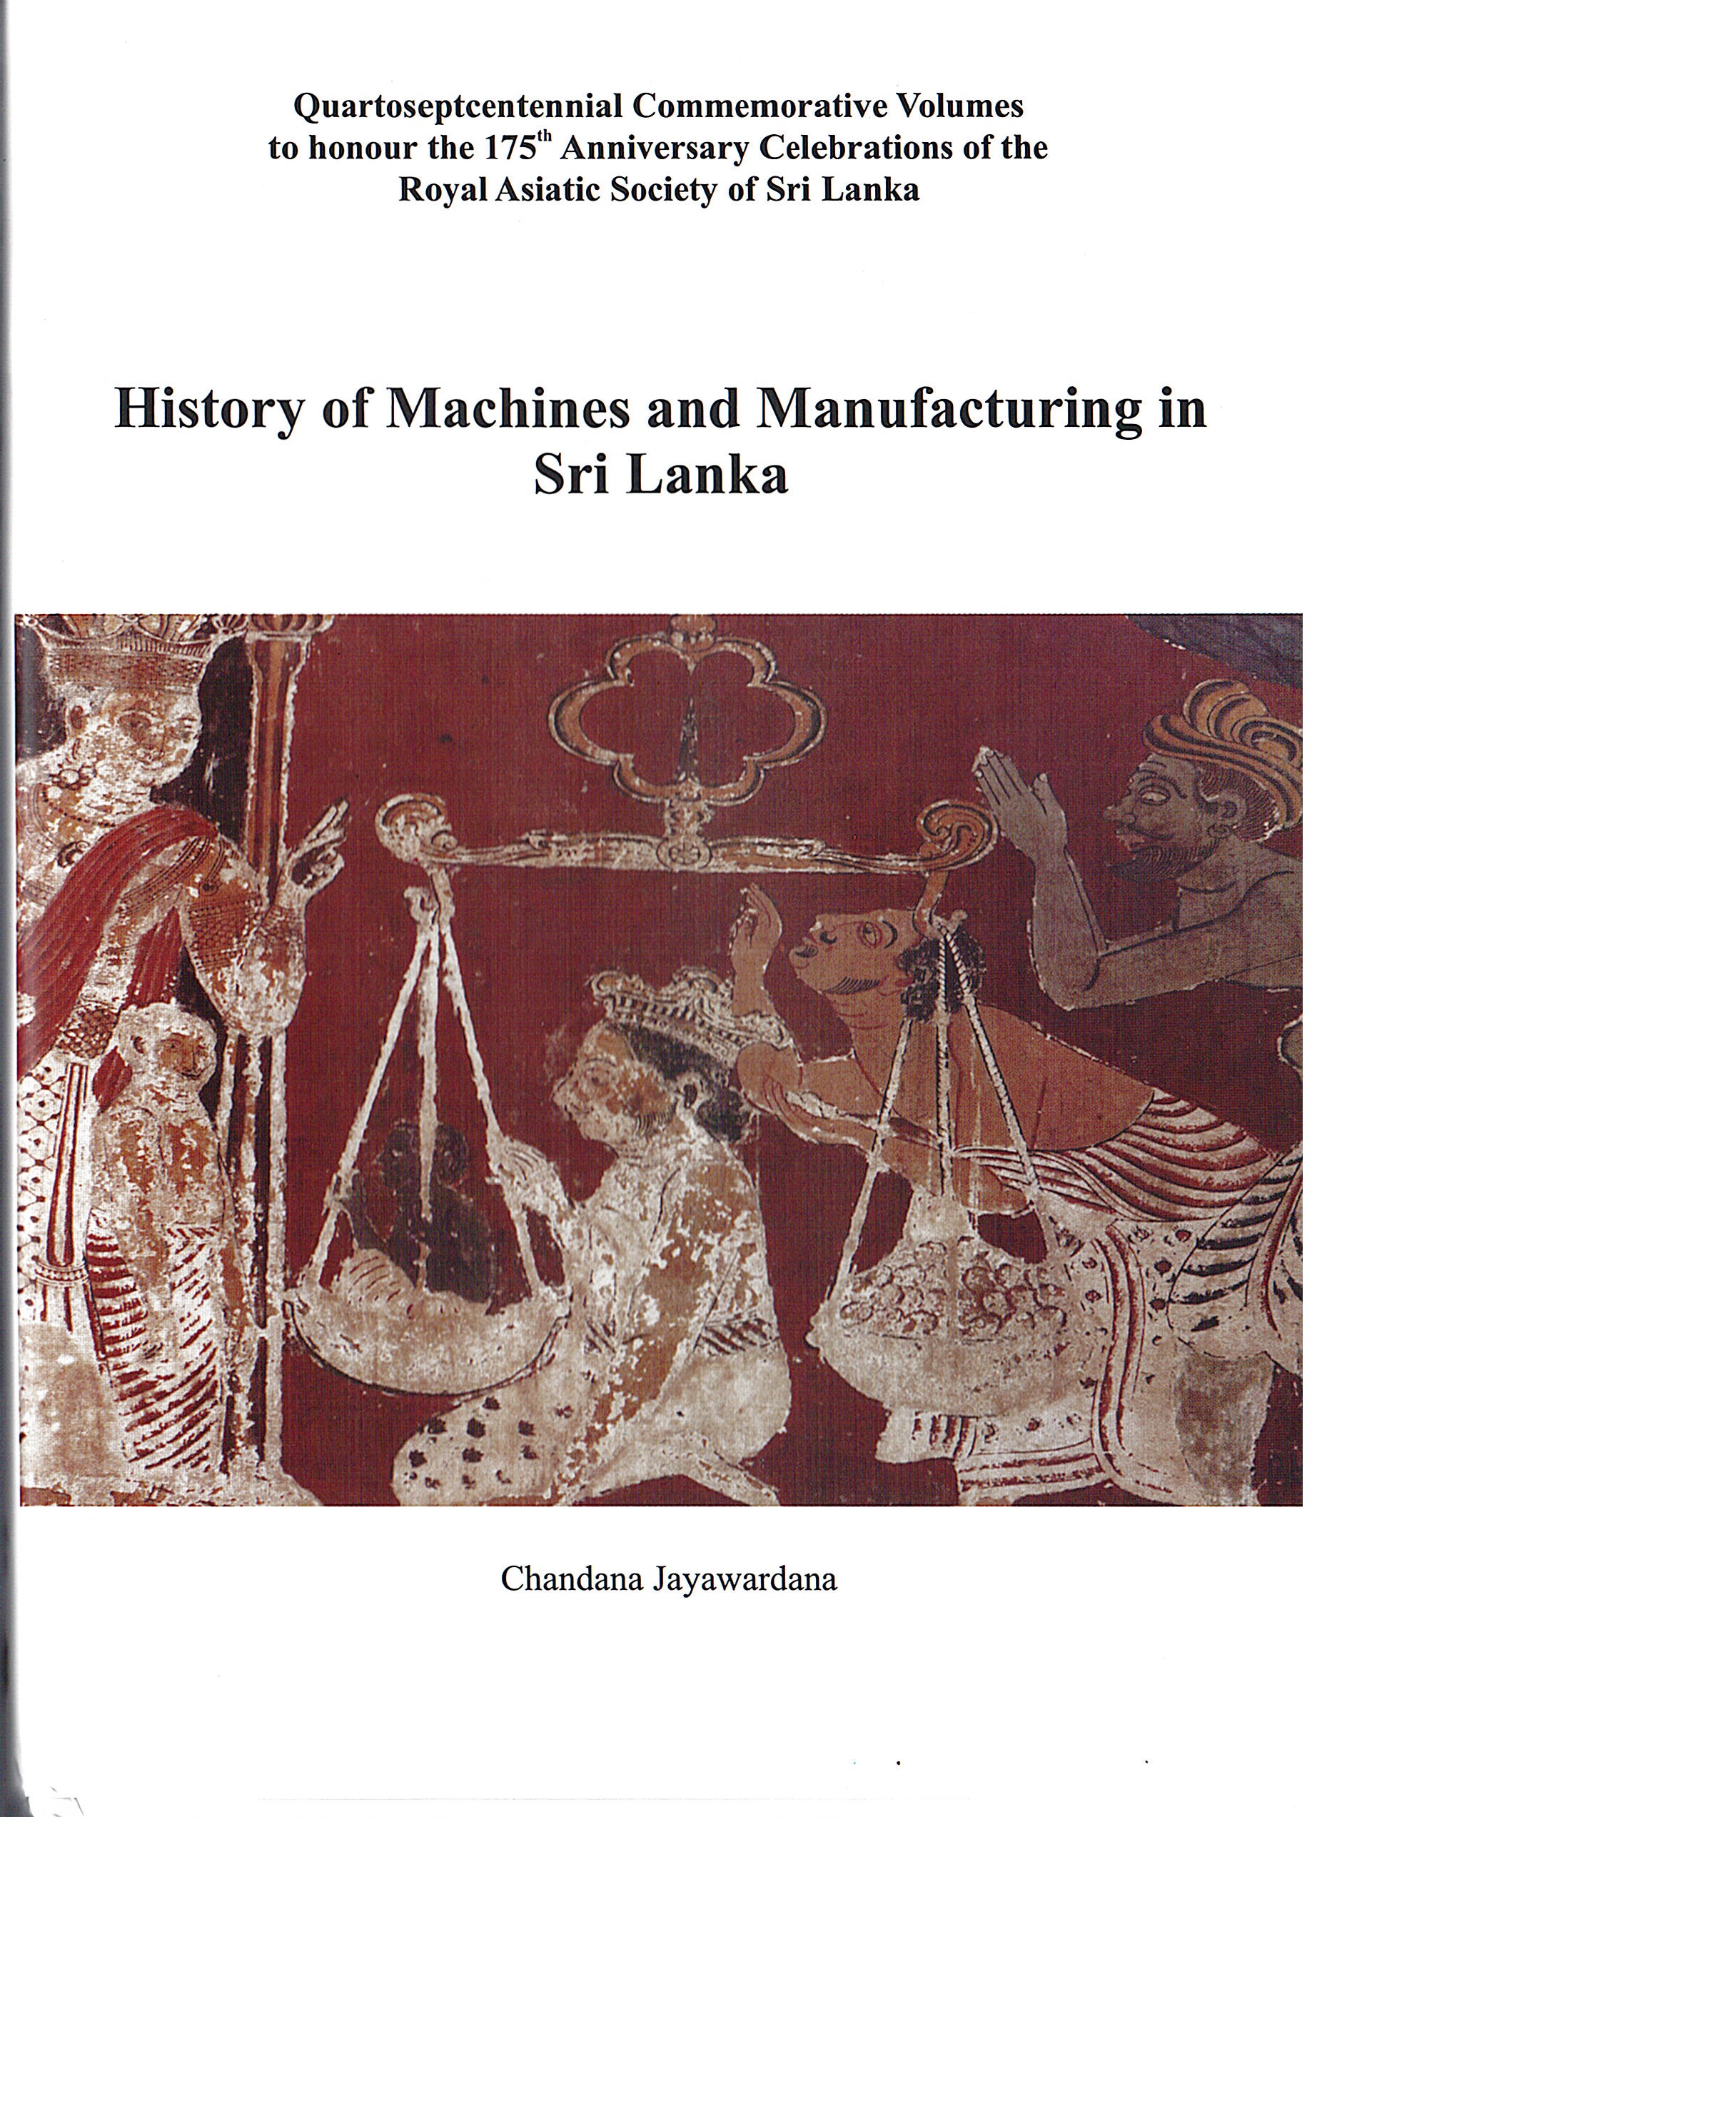 History of Machines and Manufacturing in Sri Lanka